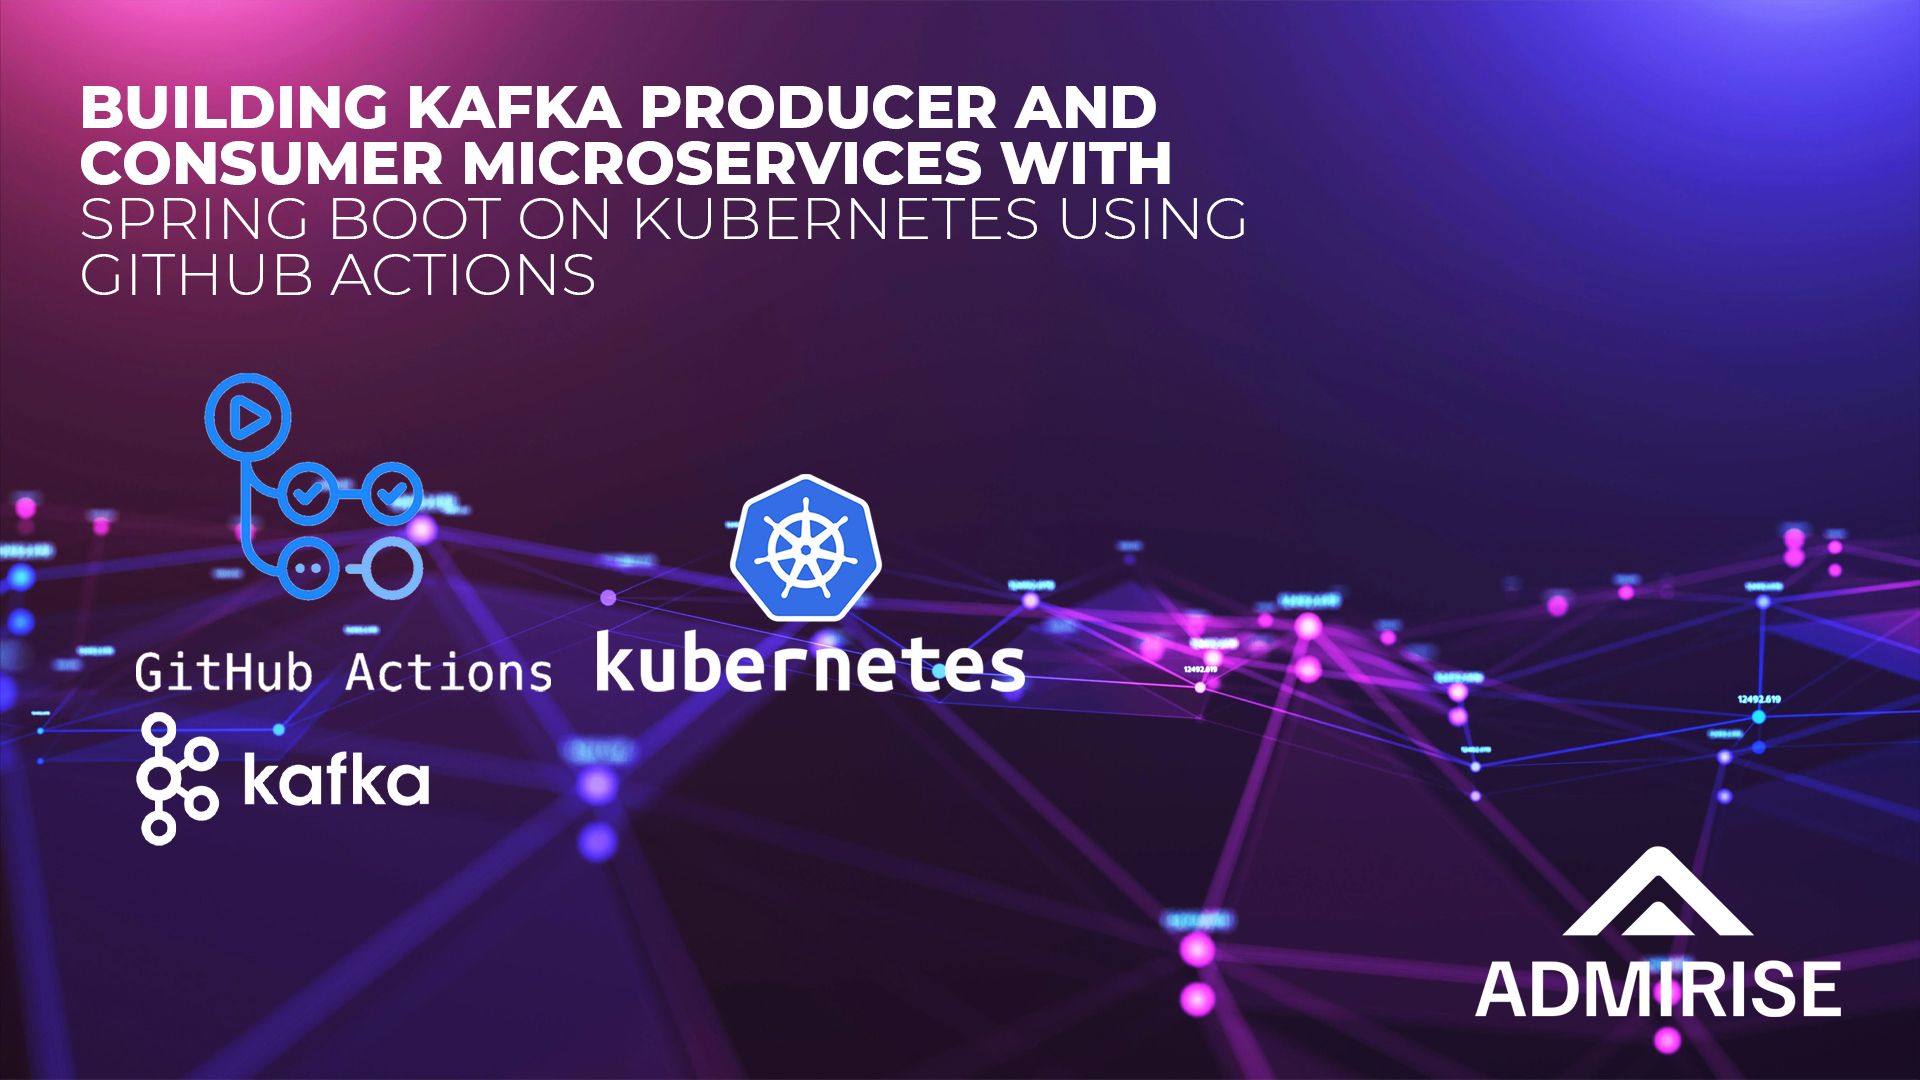 Building Kafka Producer and Consumer Microservices with Spring Boot on Kubernetes Using GitHub Actions